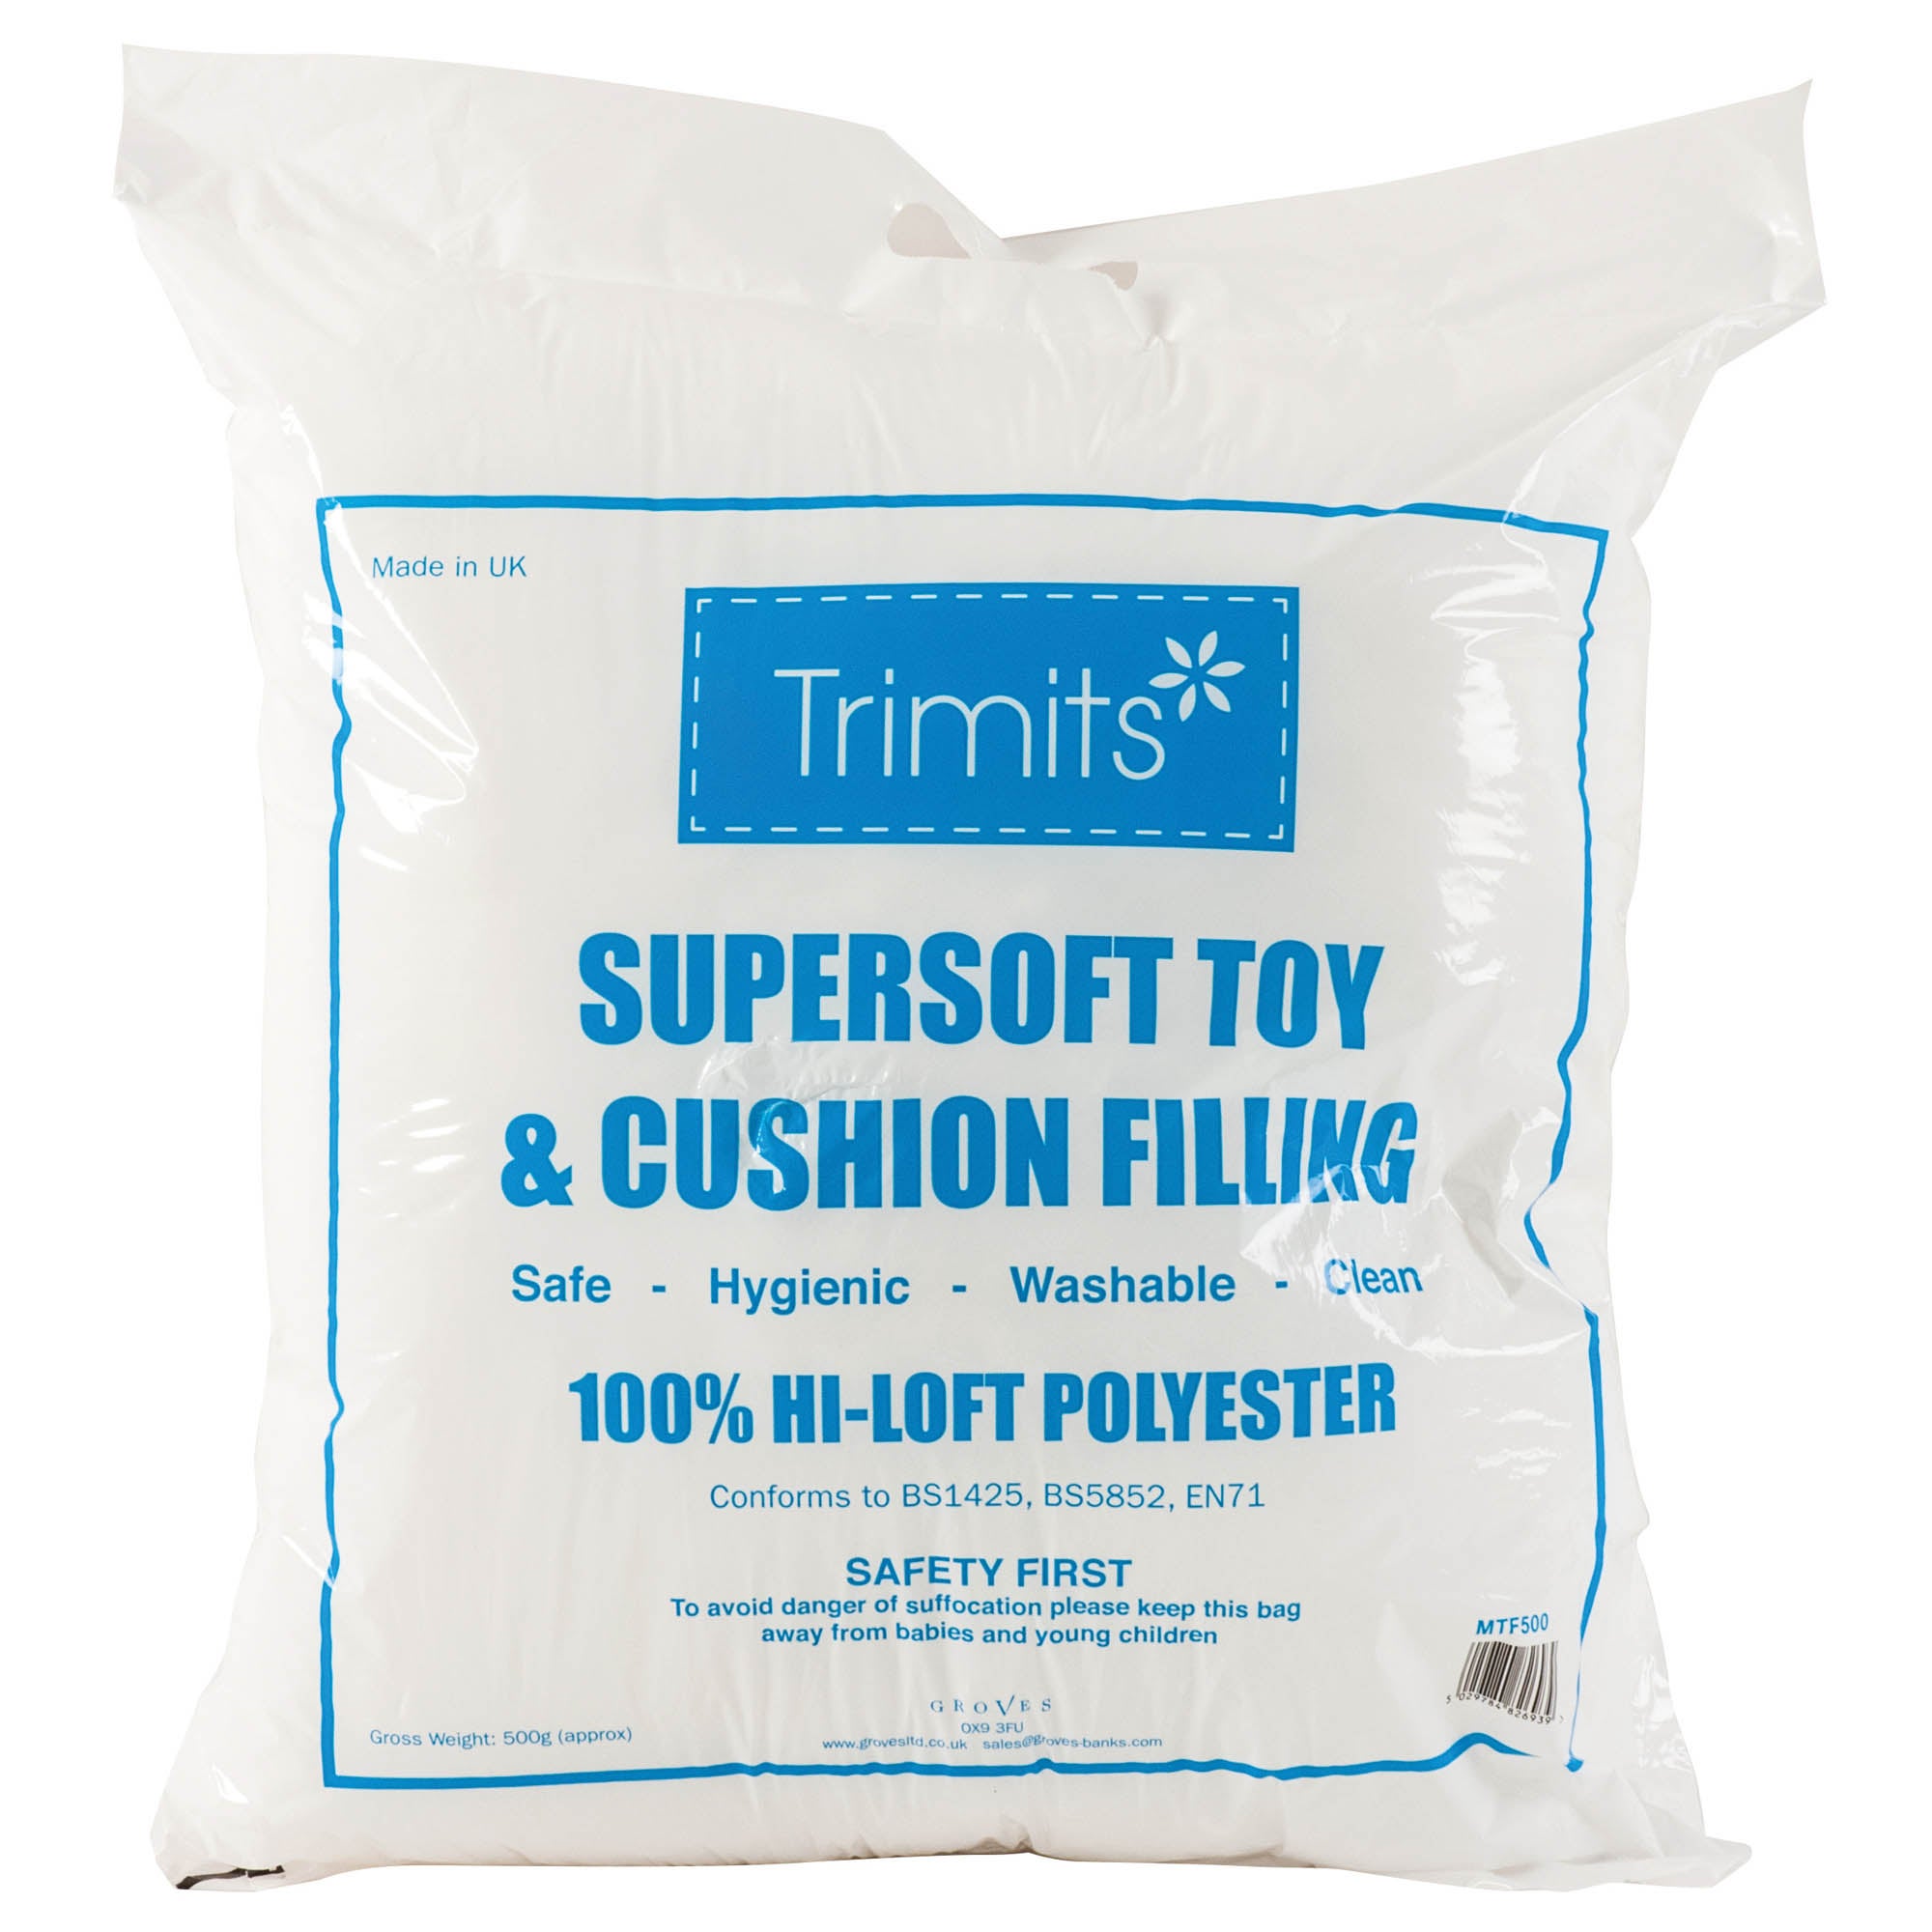 Supersoft Toy Cushion Filling 200g White